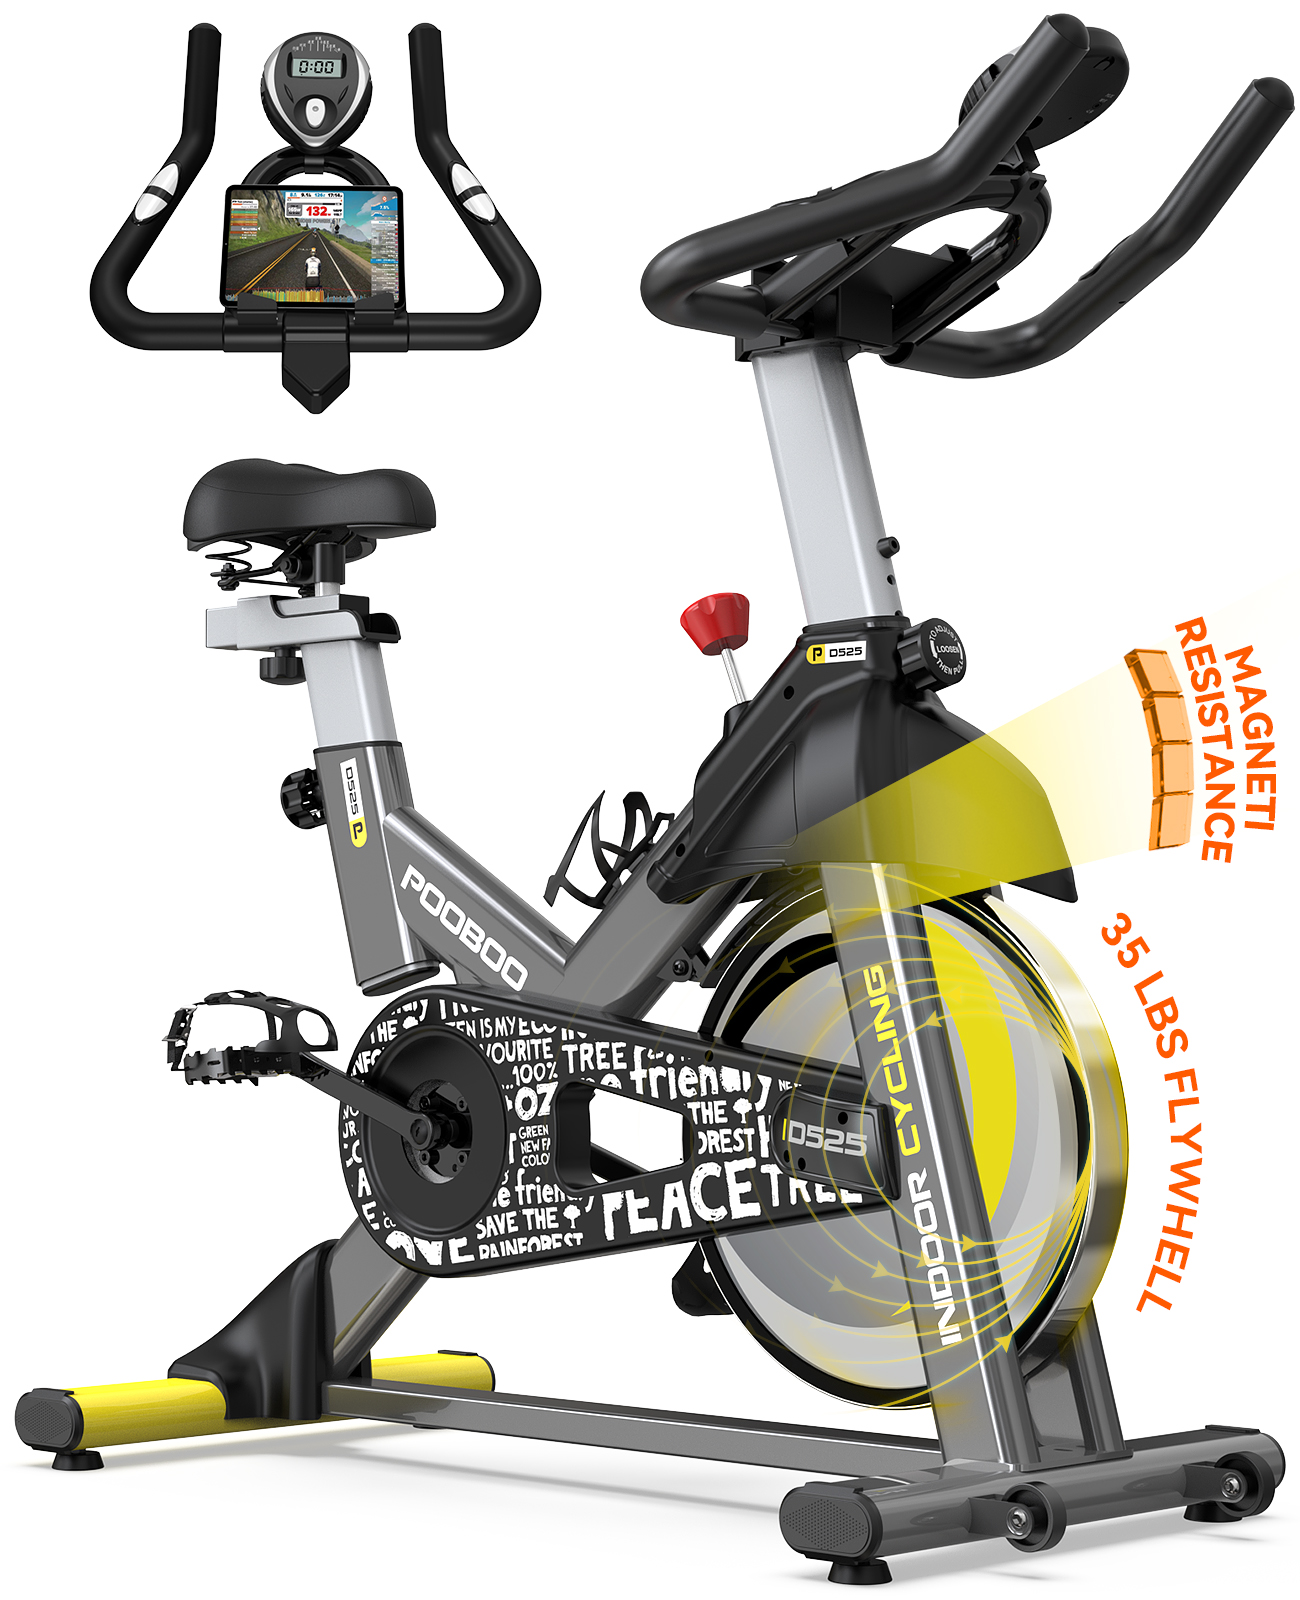 Pooboo Stationary Exercise bike Magnetic Resistance Cycling Bicycle with LCD Monitor for Indoor Cardio Workout 35 Lbs Flywheel Max Weight 330 Lbs - image 1 of 11